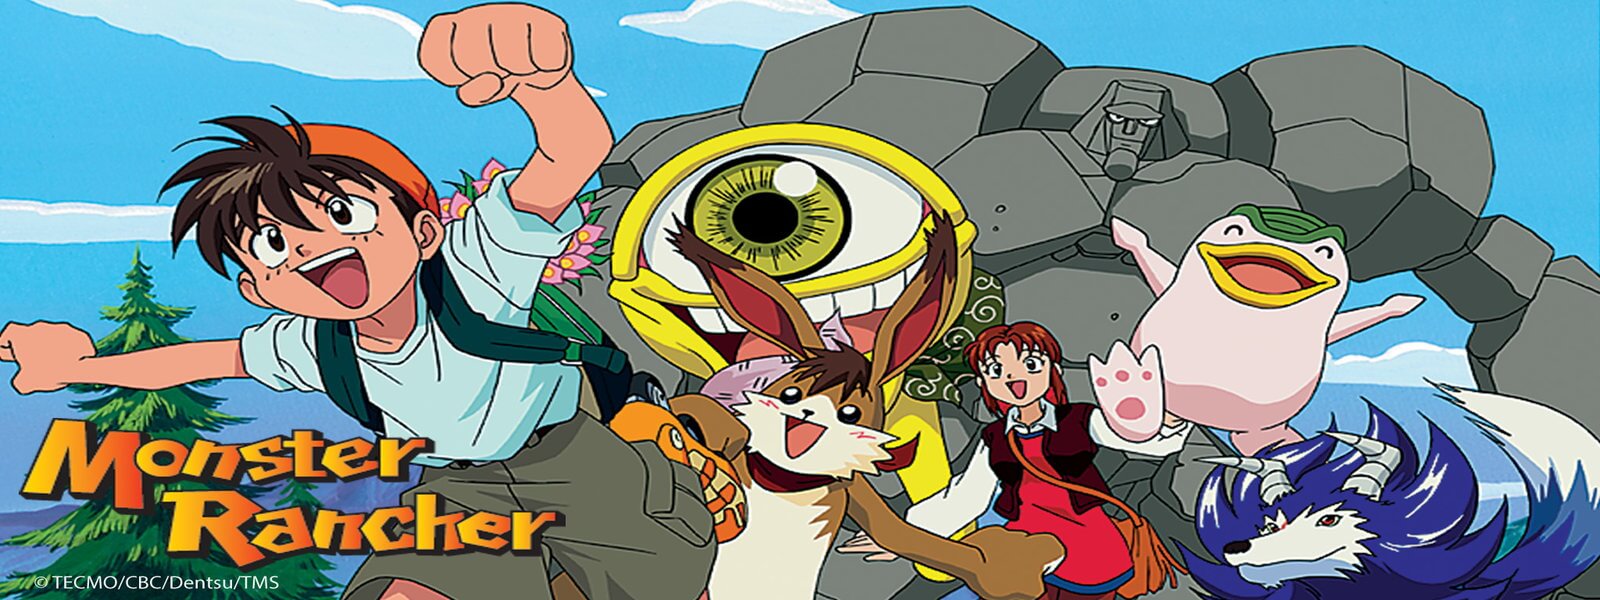 Monster Rancher (Image from Hulu)